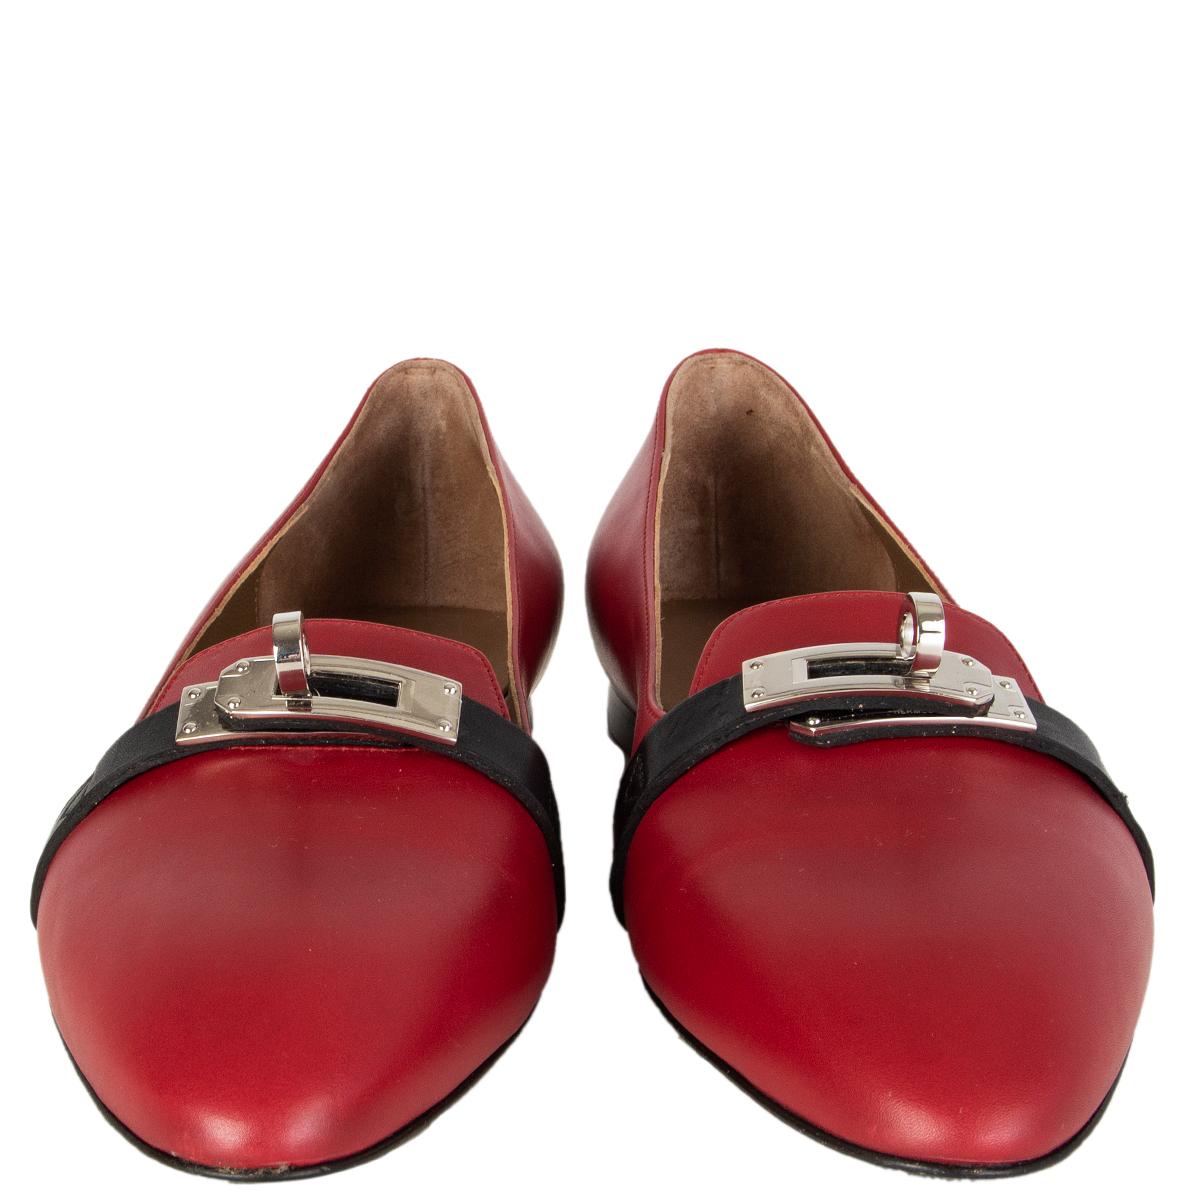 100% authentic Hermès 'Pegase' ballerina in deep red calfskin with palladium plated buckle and decorative strap. Have been worn once inside and are in virtually new condition. Come with dust bag.

Measurements
Imprinted Size	36
Shoe Size	36
Inside